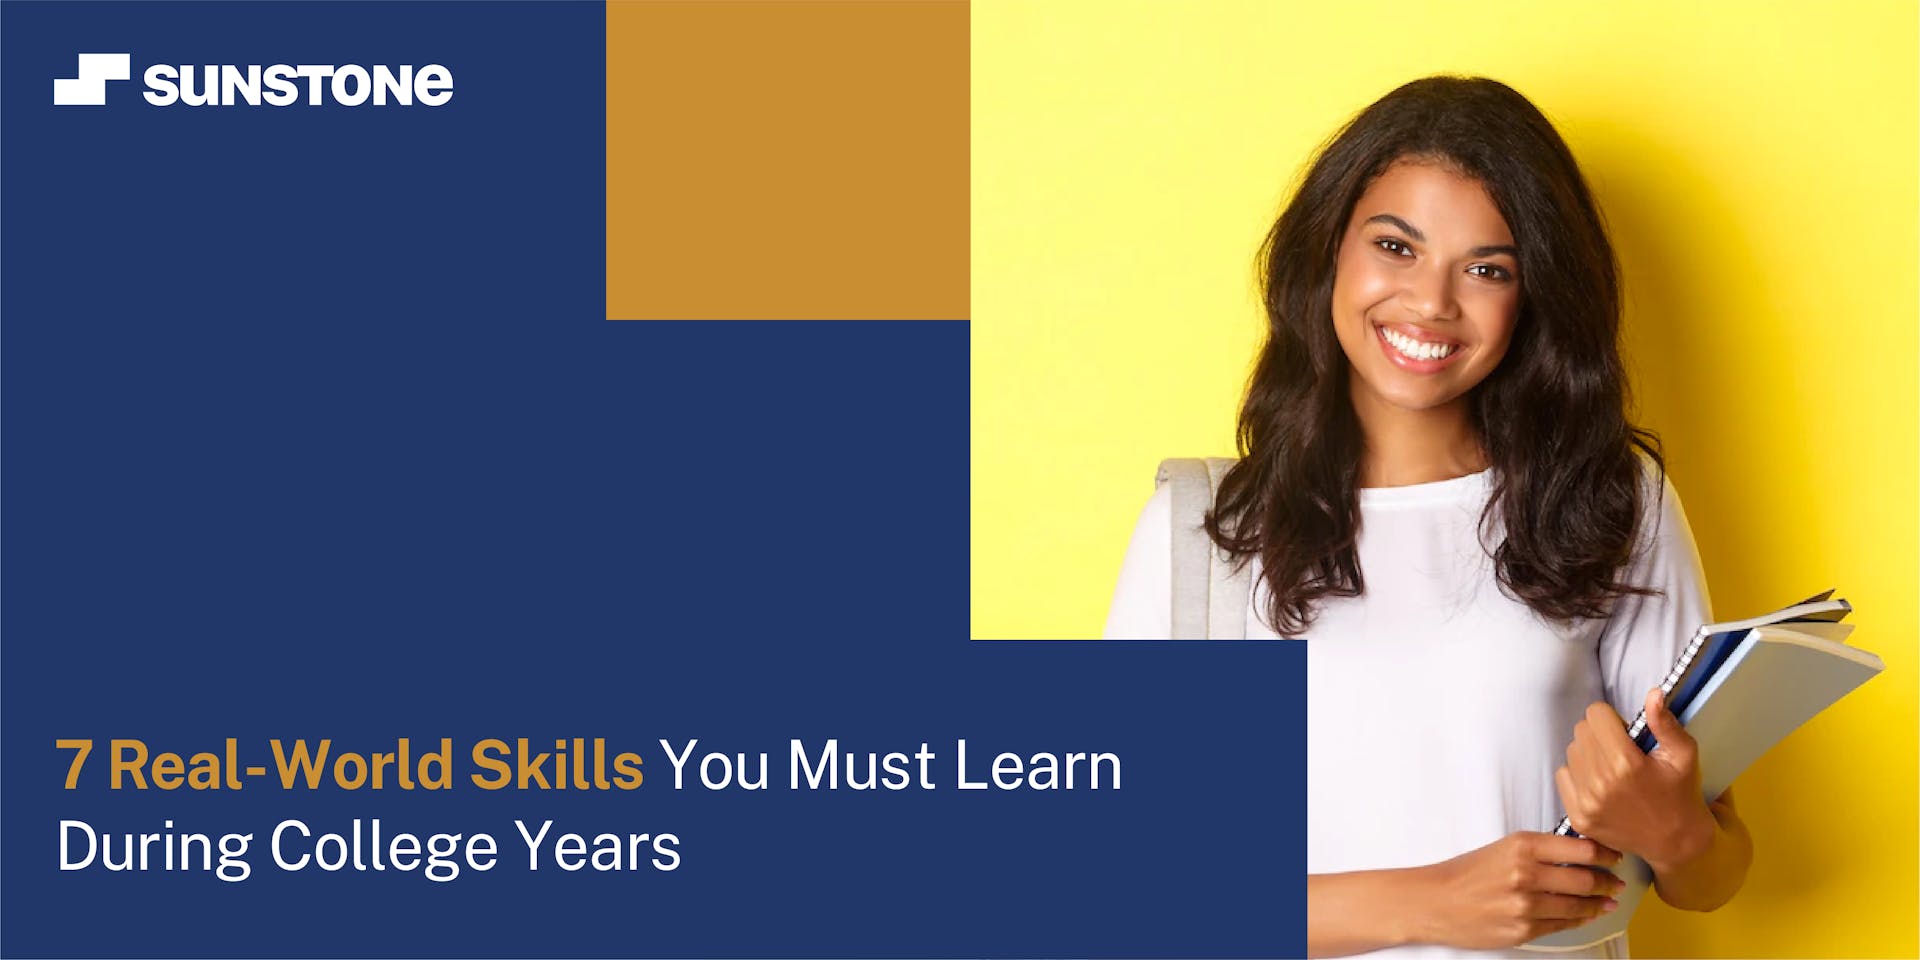 7 Real-World Skills to Develop in College Years | Sunstone Blog